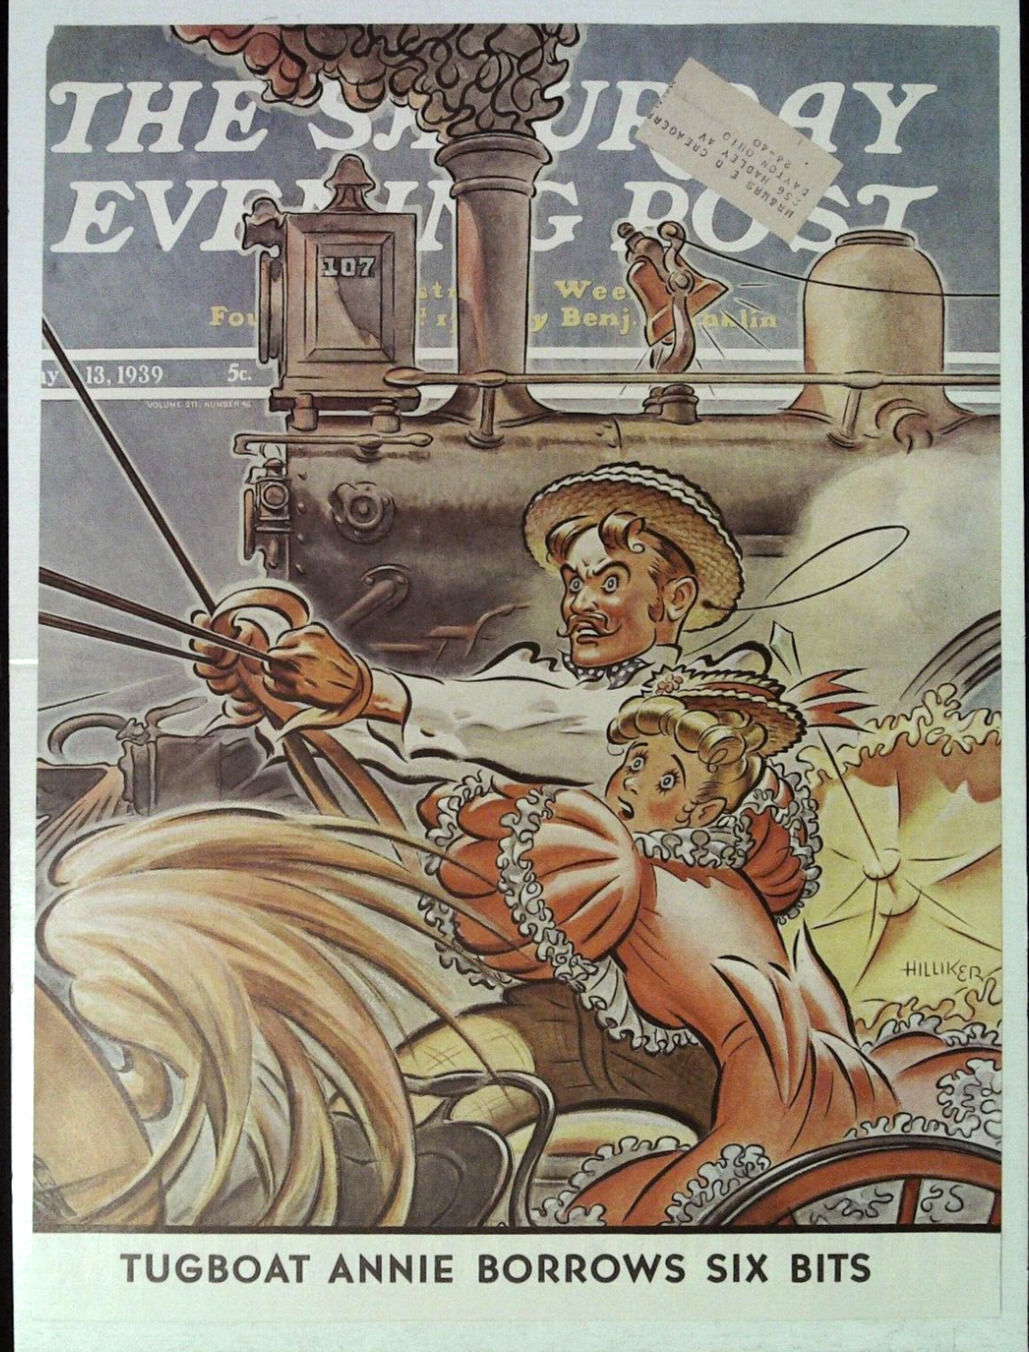 JANUARY 13, 1939 SATURDAY EVENING POST COVER STAGECOACH & TRAIN HILLINKER ART